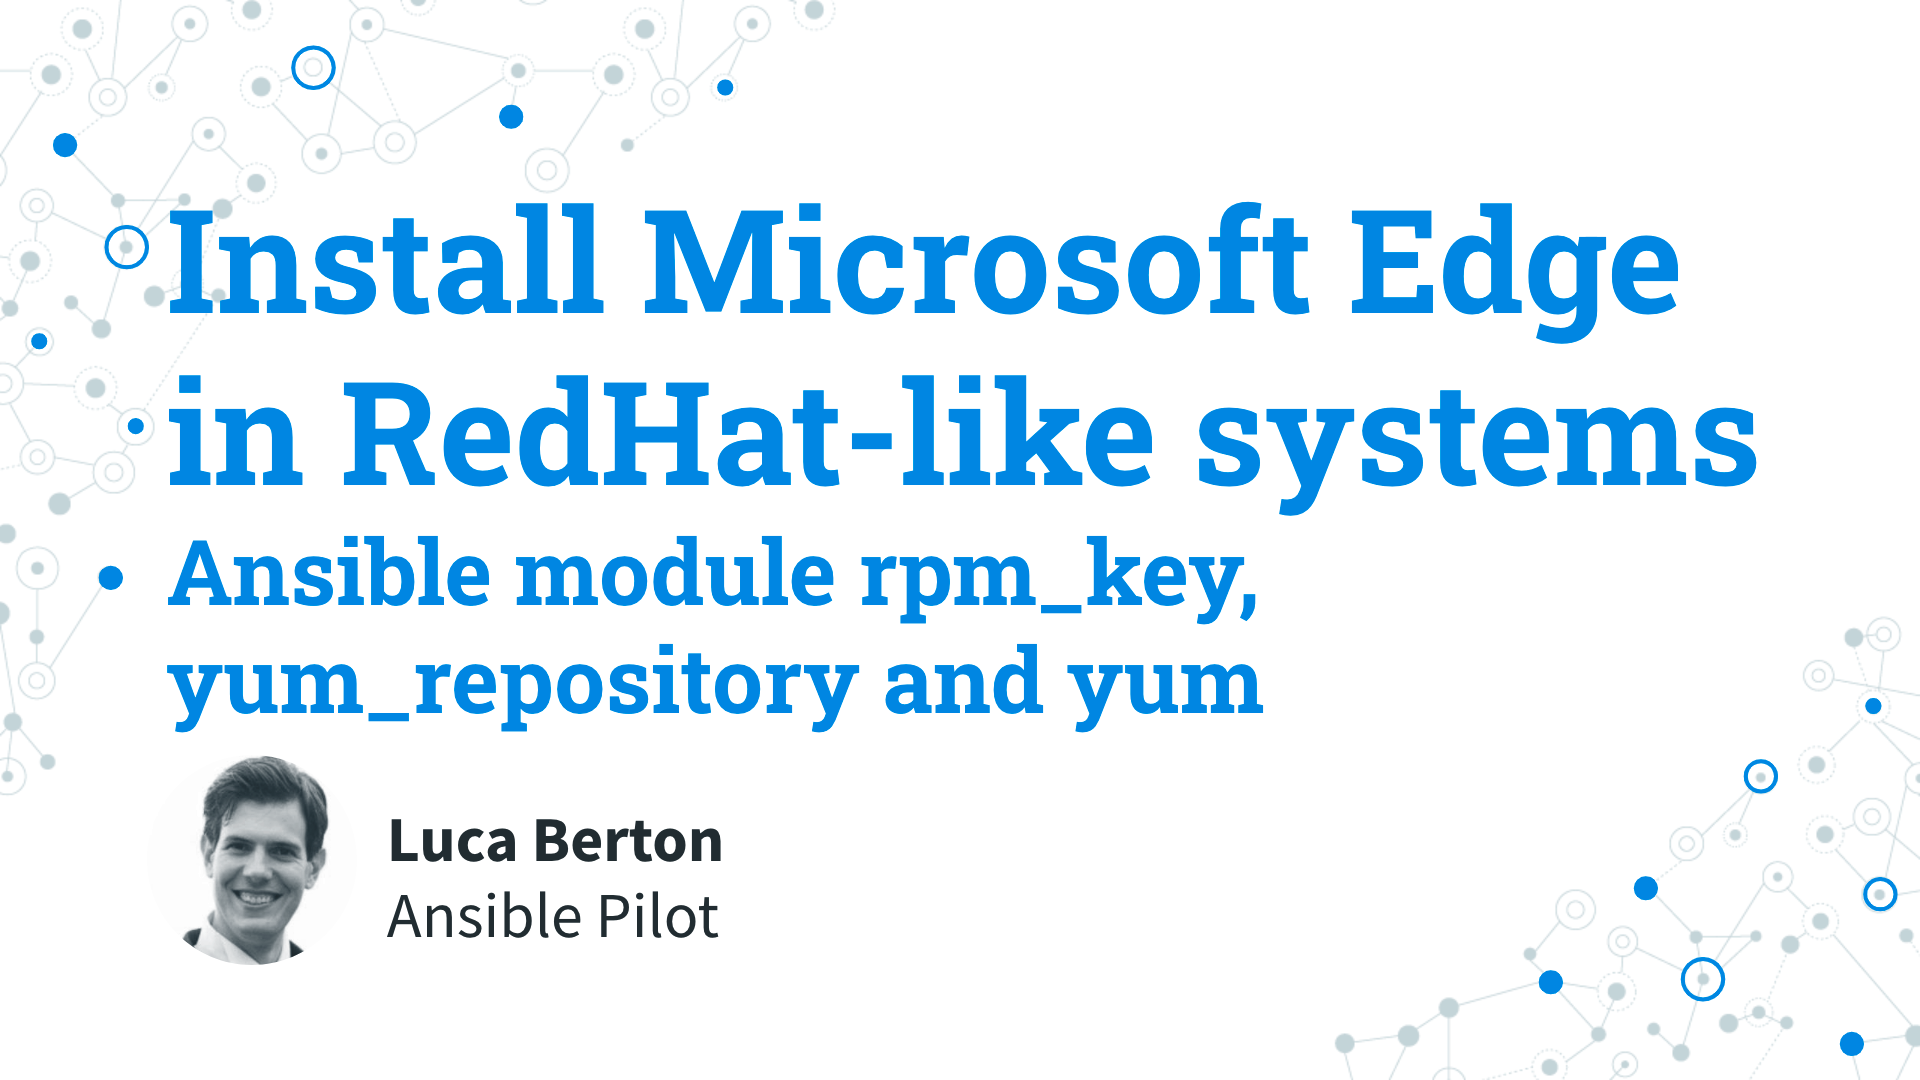 Install Microsoft Edge in RedHat-like systems - Ansible module rpm_key, yum_repository and yum